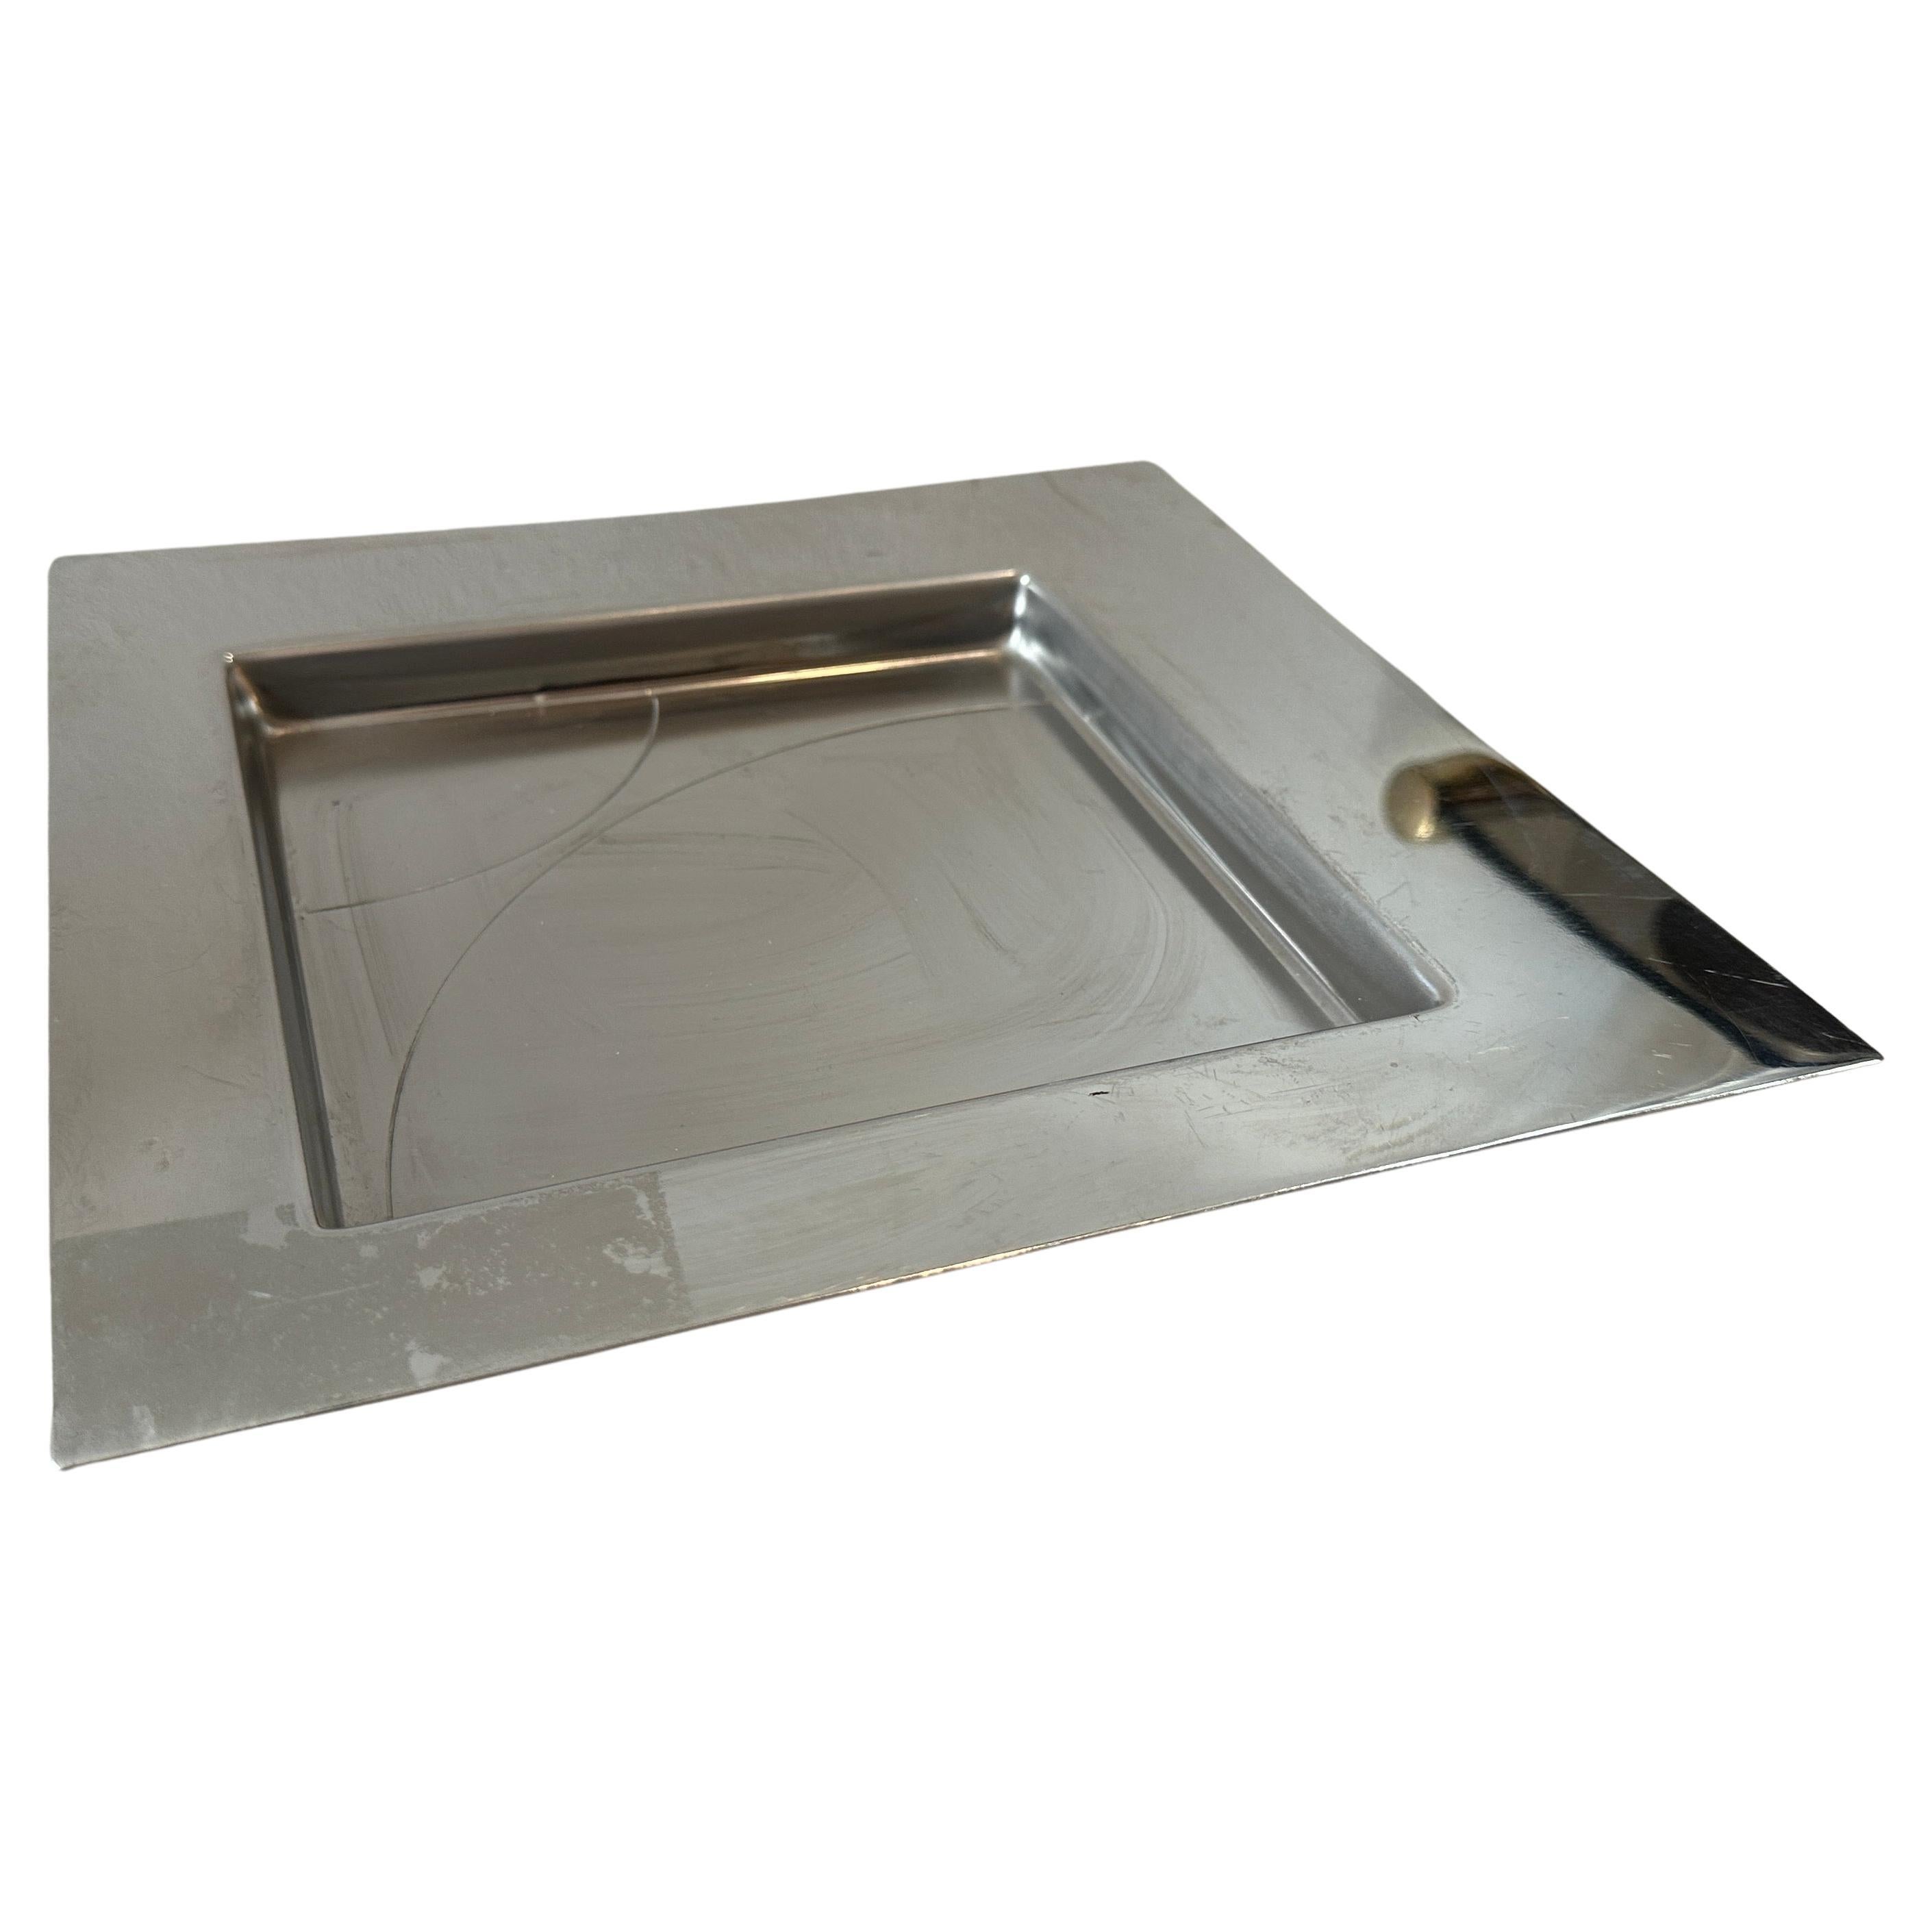 A silver plated square tray designed by Mattia Pastorino for Forme Contemporanee di Cleto Munari, other important designers like Carlo Scarpa and Gio Ponti cooperate for this series of item, it's in good condition overall. The tray embodies a